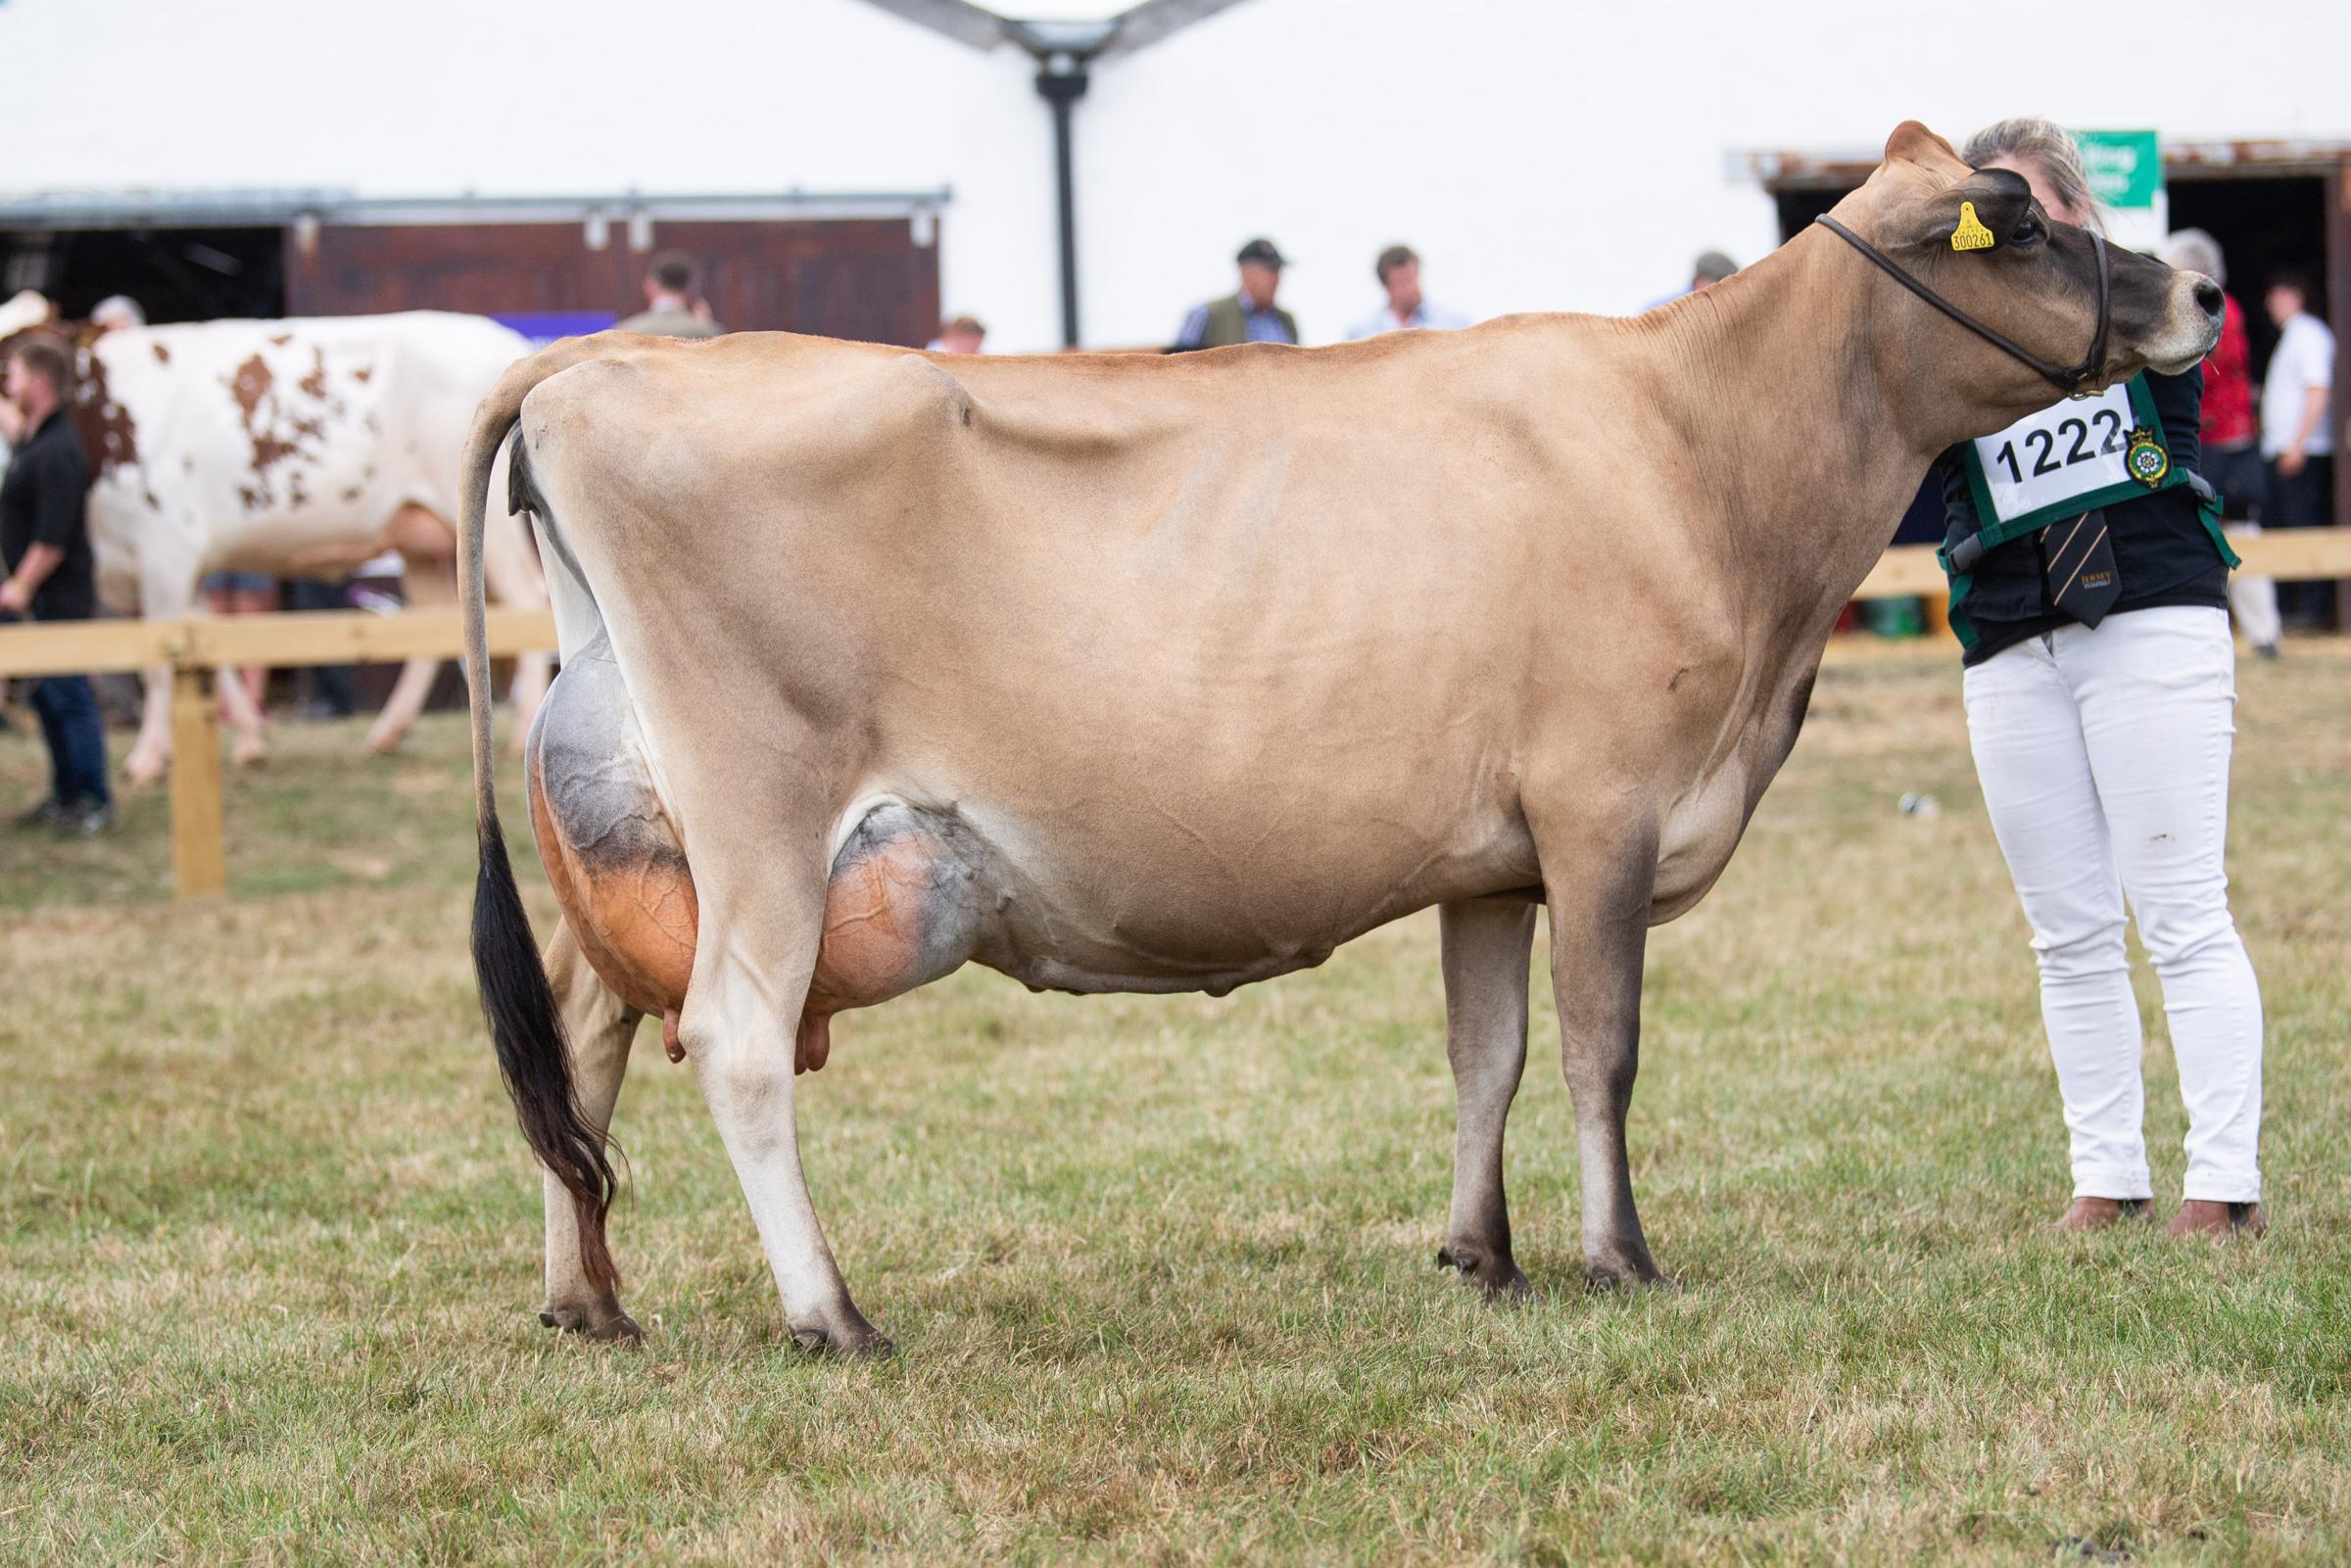 Coldeaton Cobalt Alison from the Coldeaton herd was Jersey champion  Ref:RH140722142  Rob Haining / The Scottish Farmer...